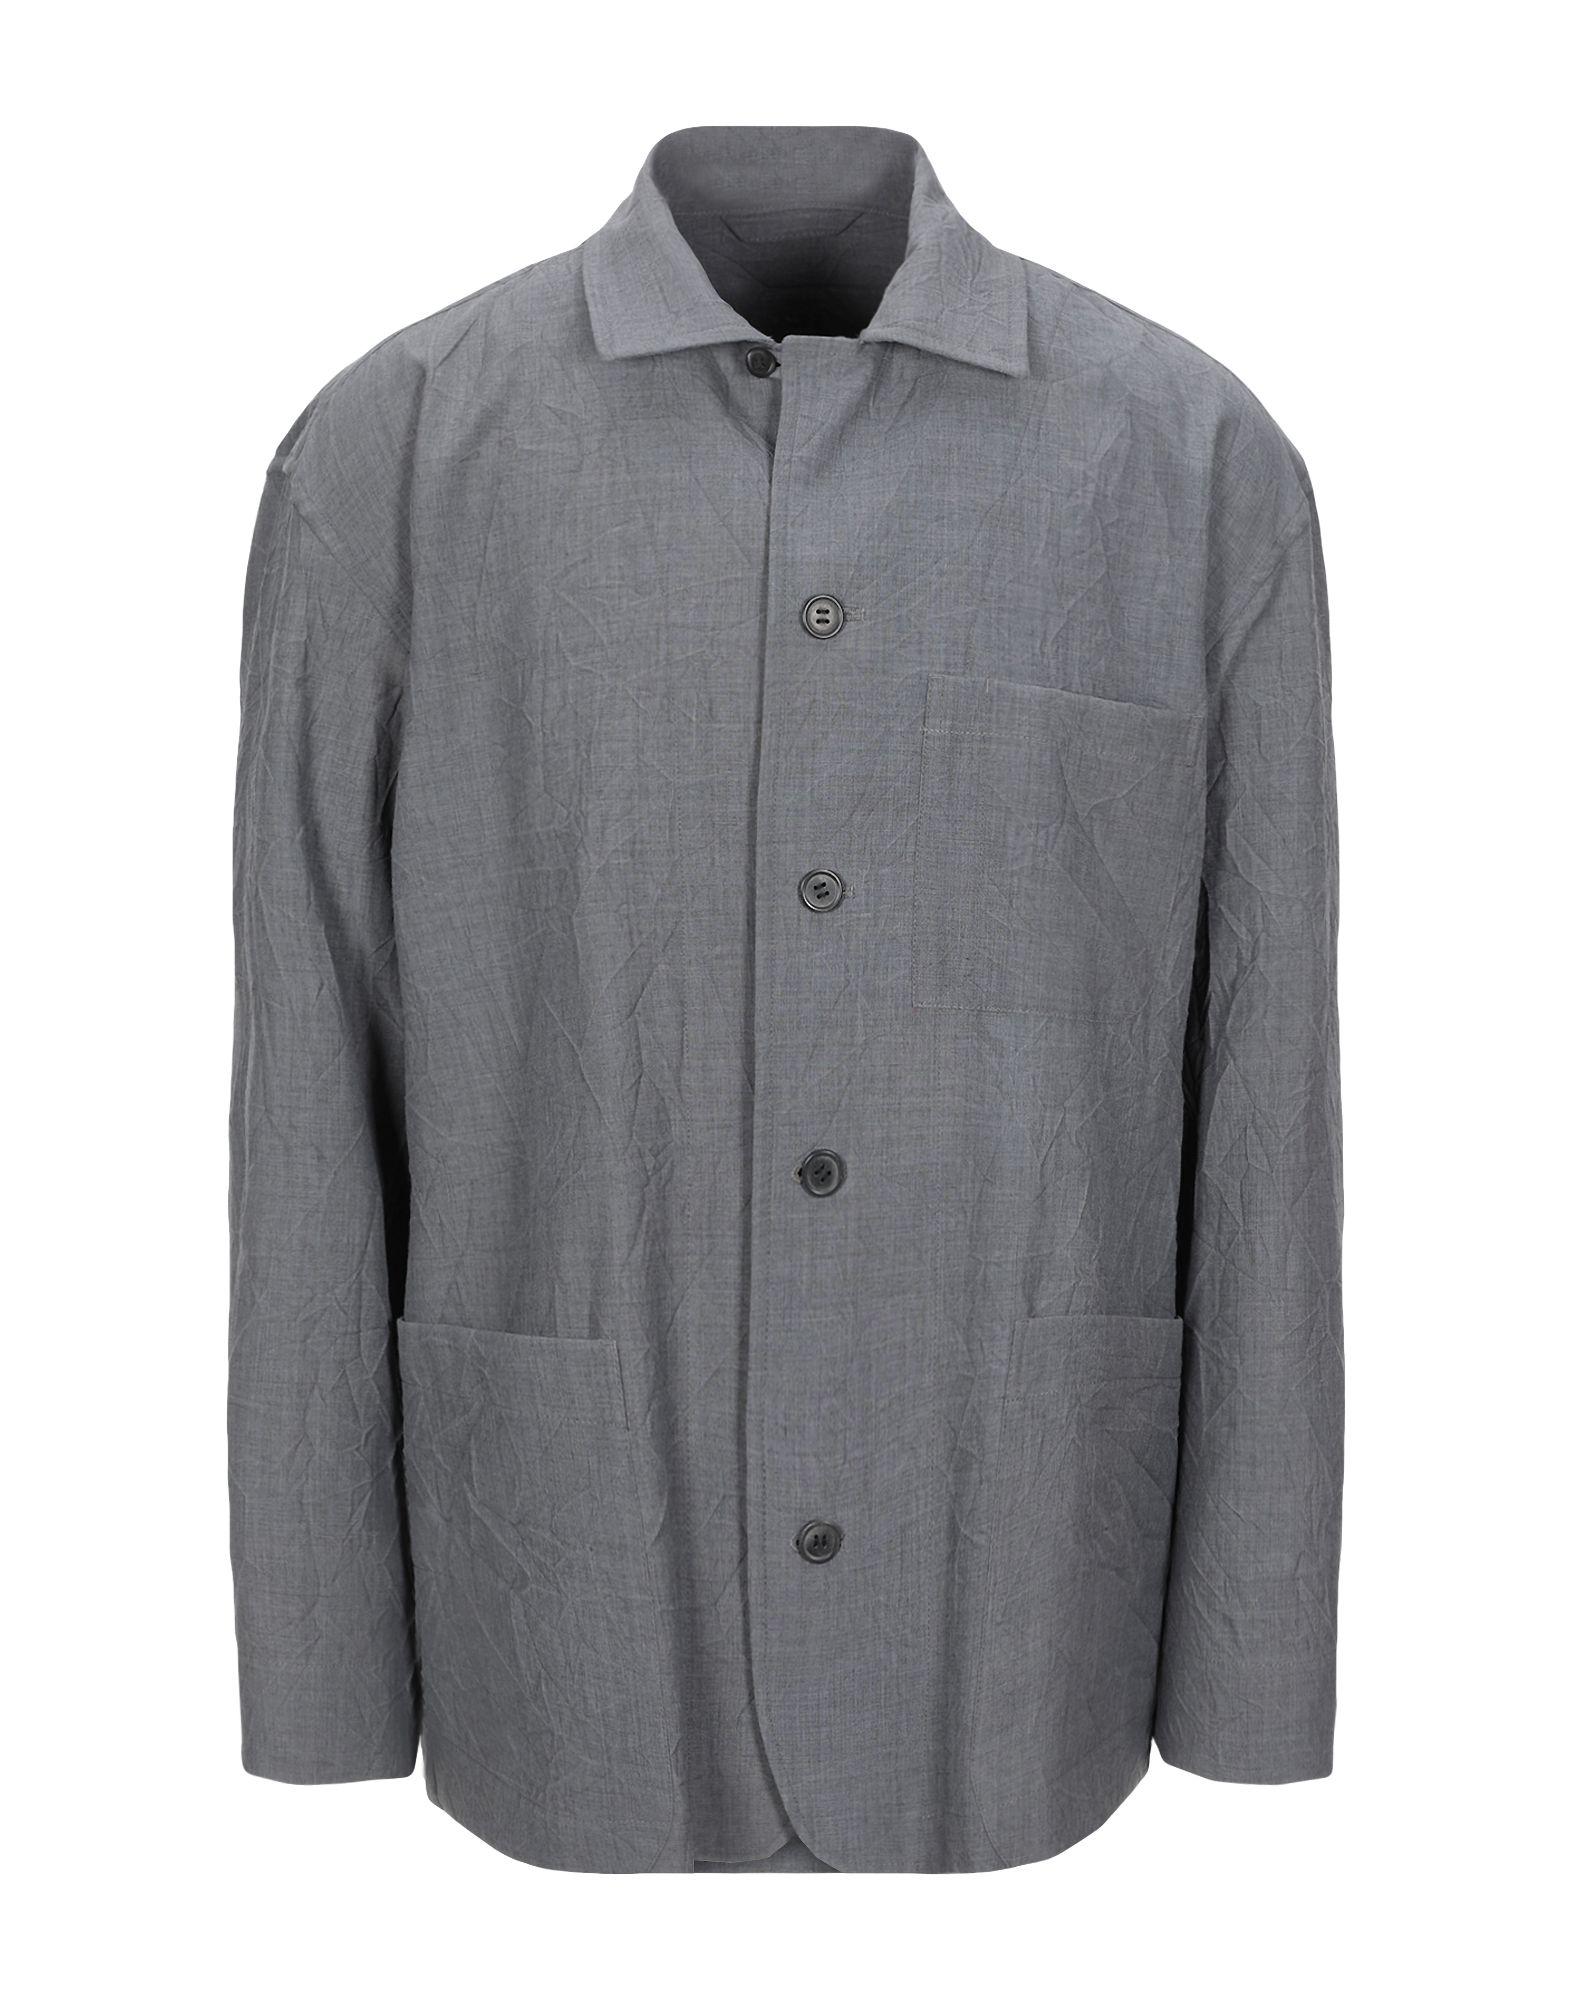 Issey Miyake Suit Jacket in Grey (Gray) for Men - Lyst